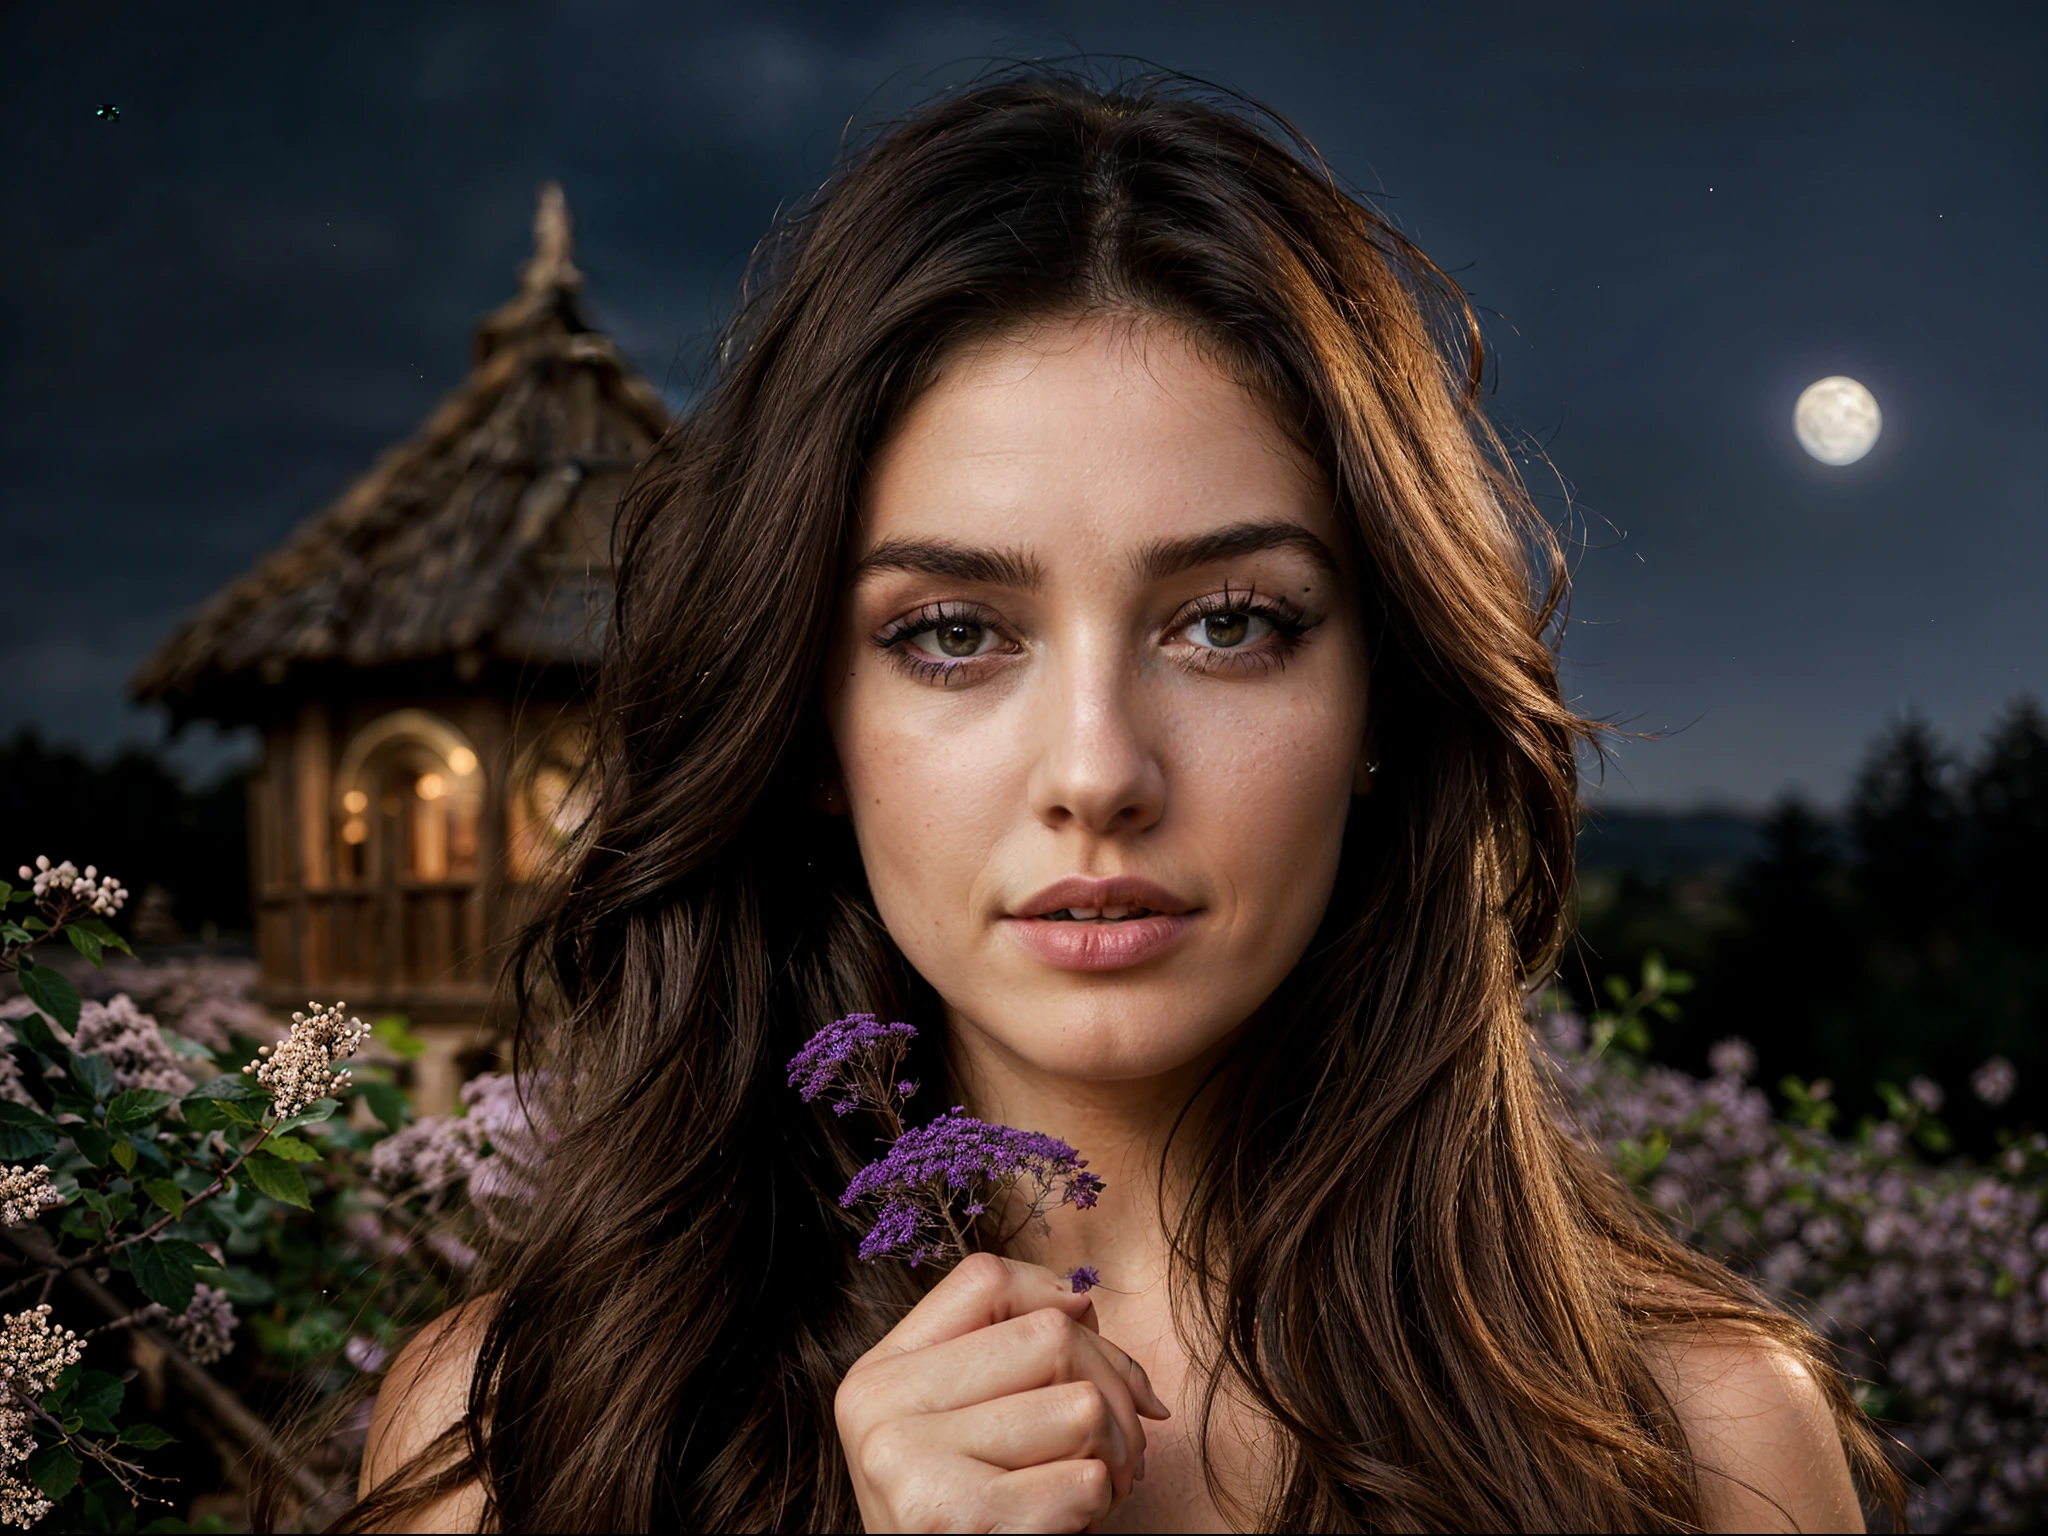 photo of beautiful 26 y.o woman, smokey eye makeup, 4k uhd, high quality, dramatic, cinematic, (long flowy (umber hair:1.2)), violet flowers, swarm, the bird seed in her hands, growing into birds, giants shelter her body, intricate ornate lean-to, the night sky, deep dark shadows, hide new seasons, the woman is aware and watching us